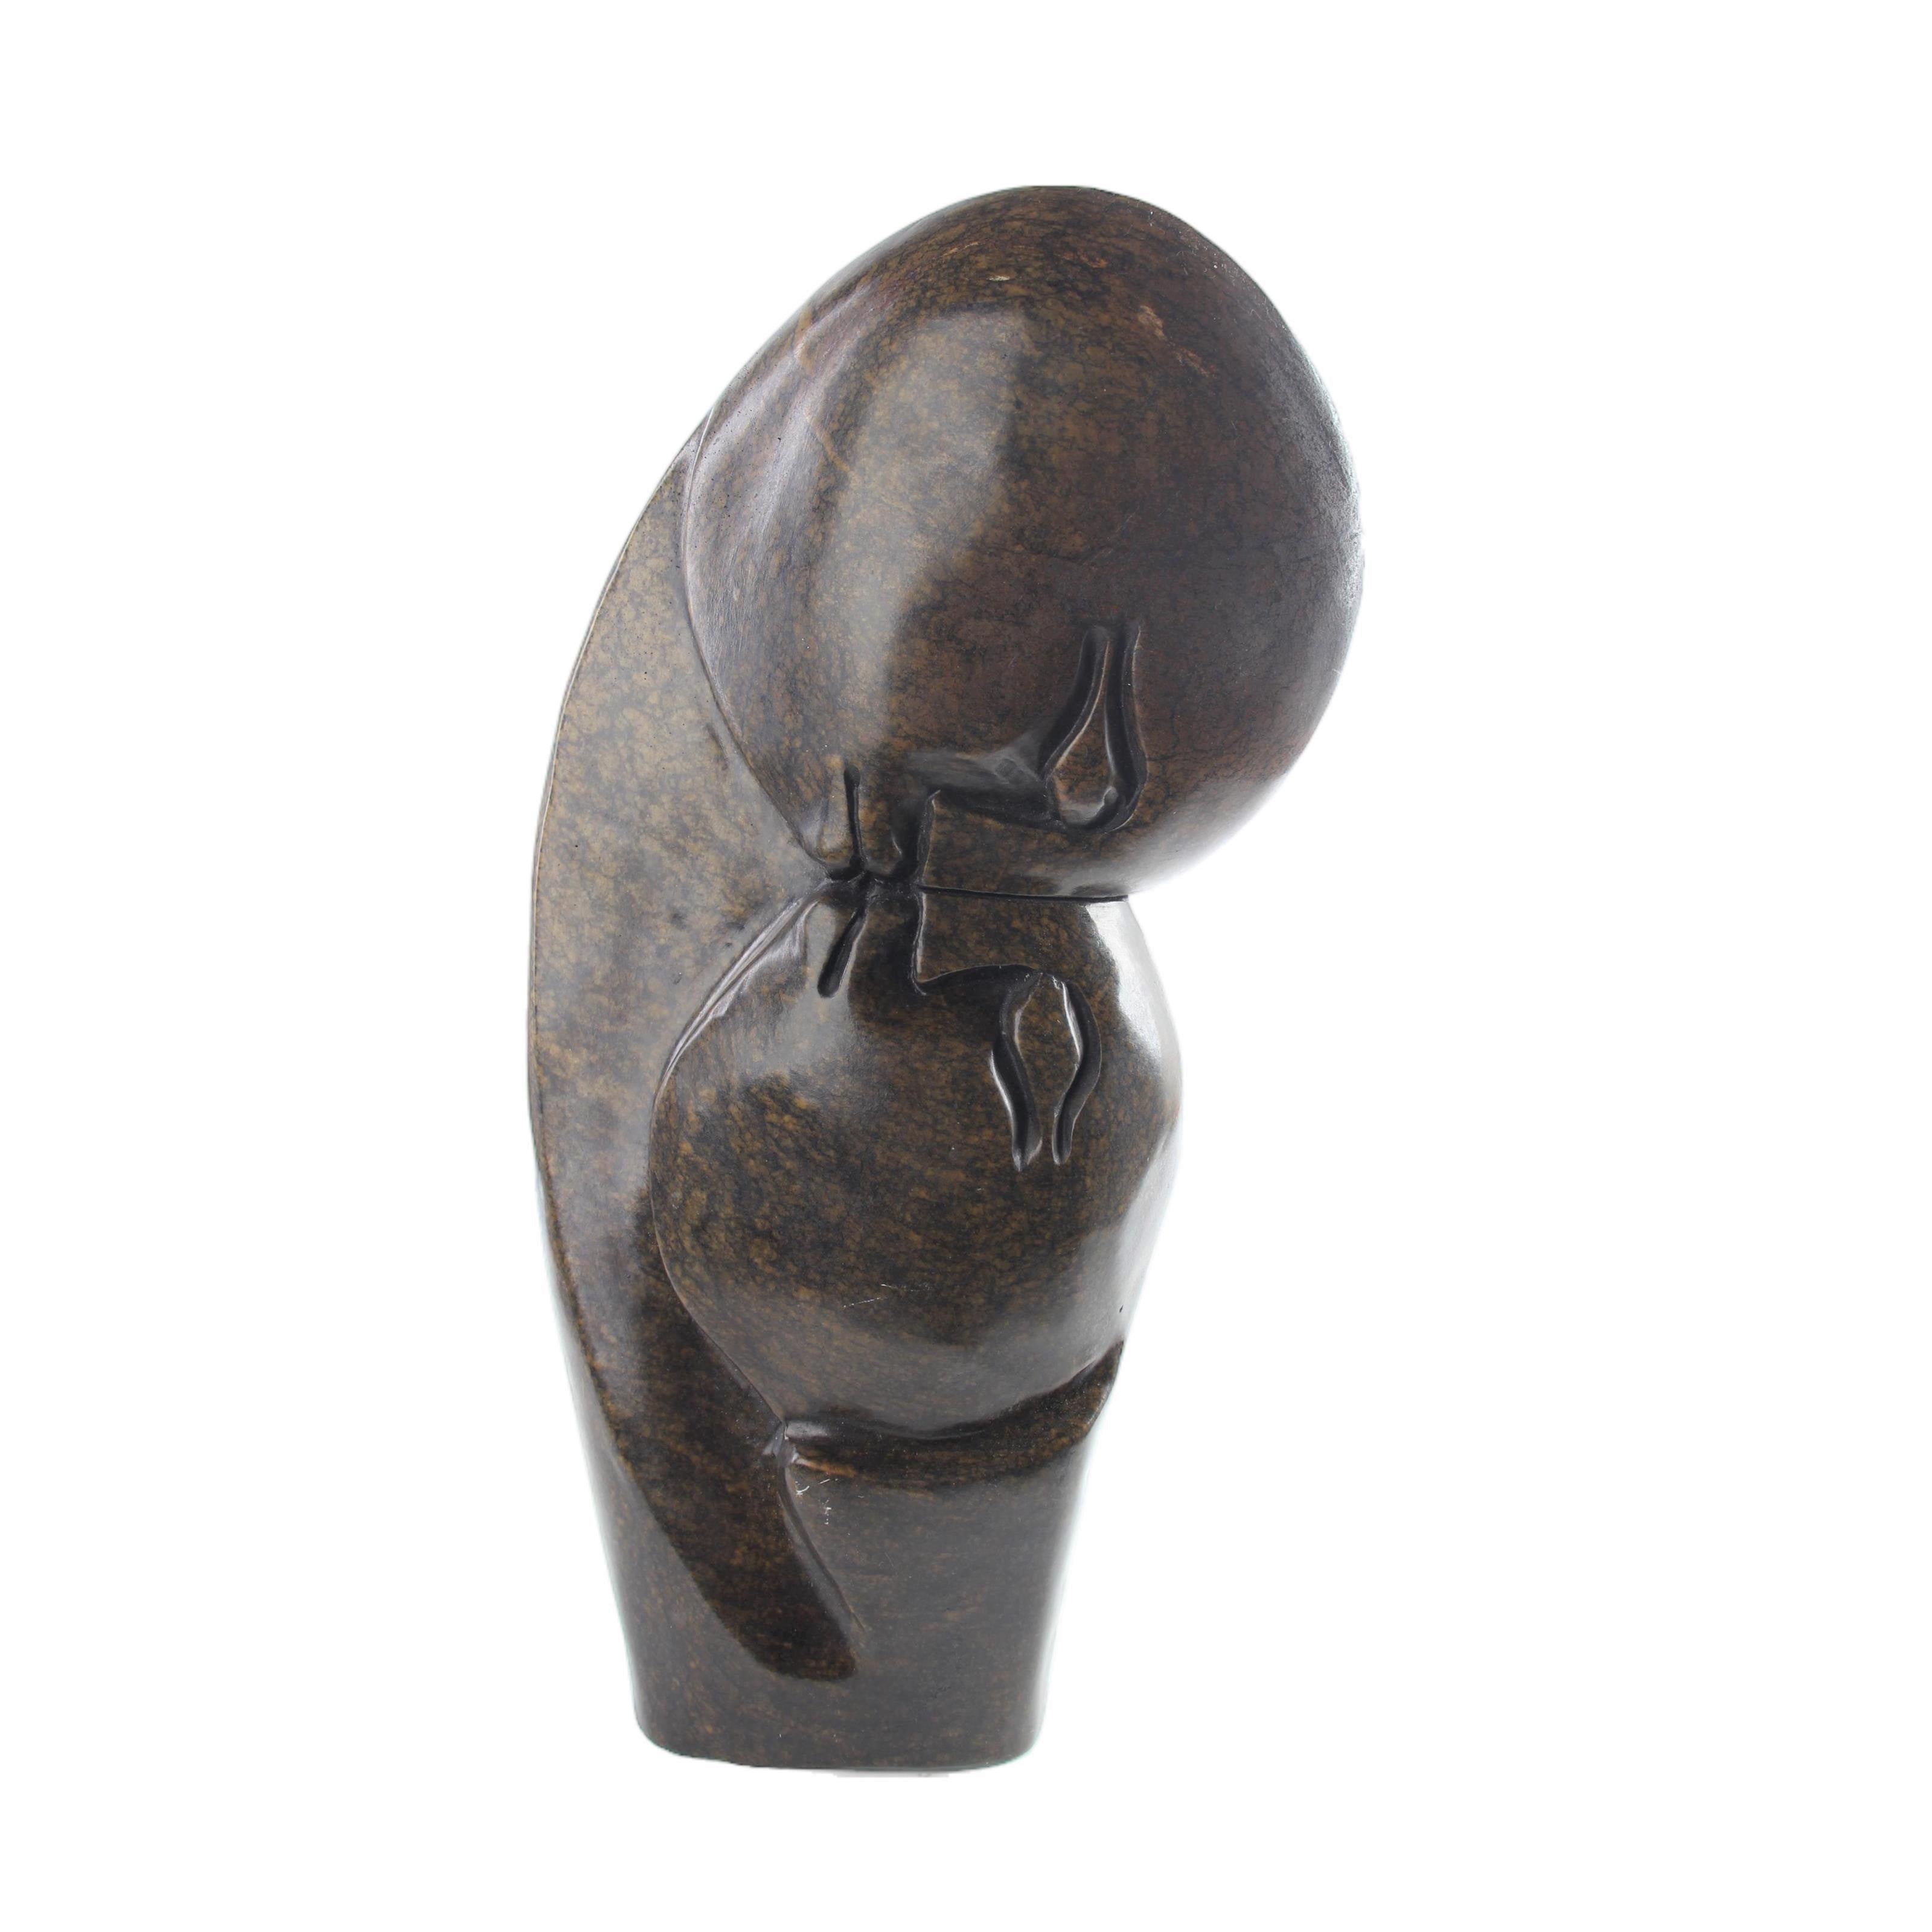 Shona Tribe Serpentine Stone Lovers ~16.5" Tall - Lovers